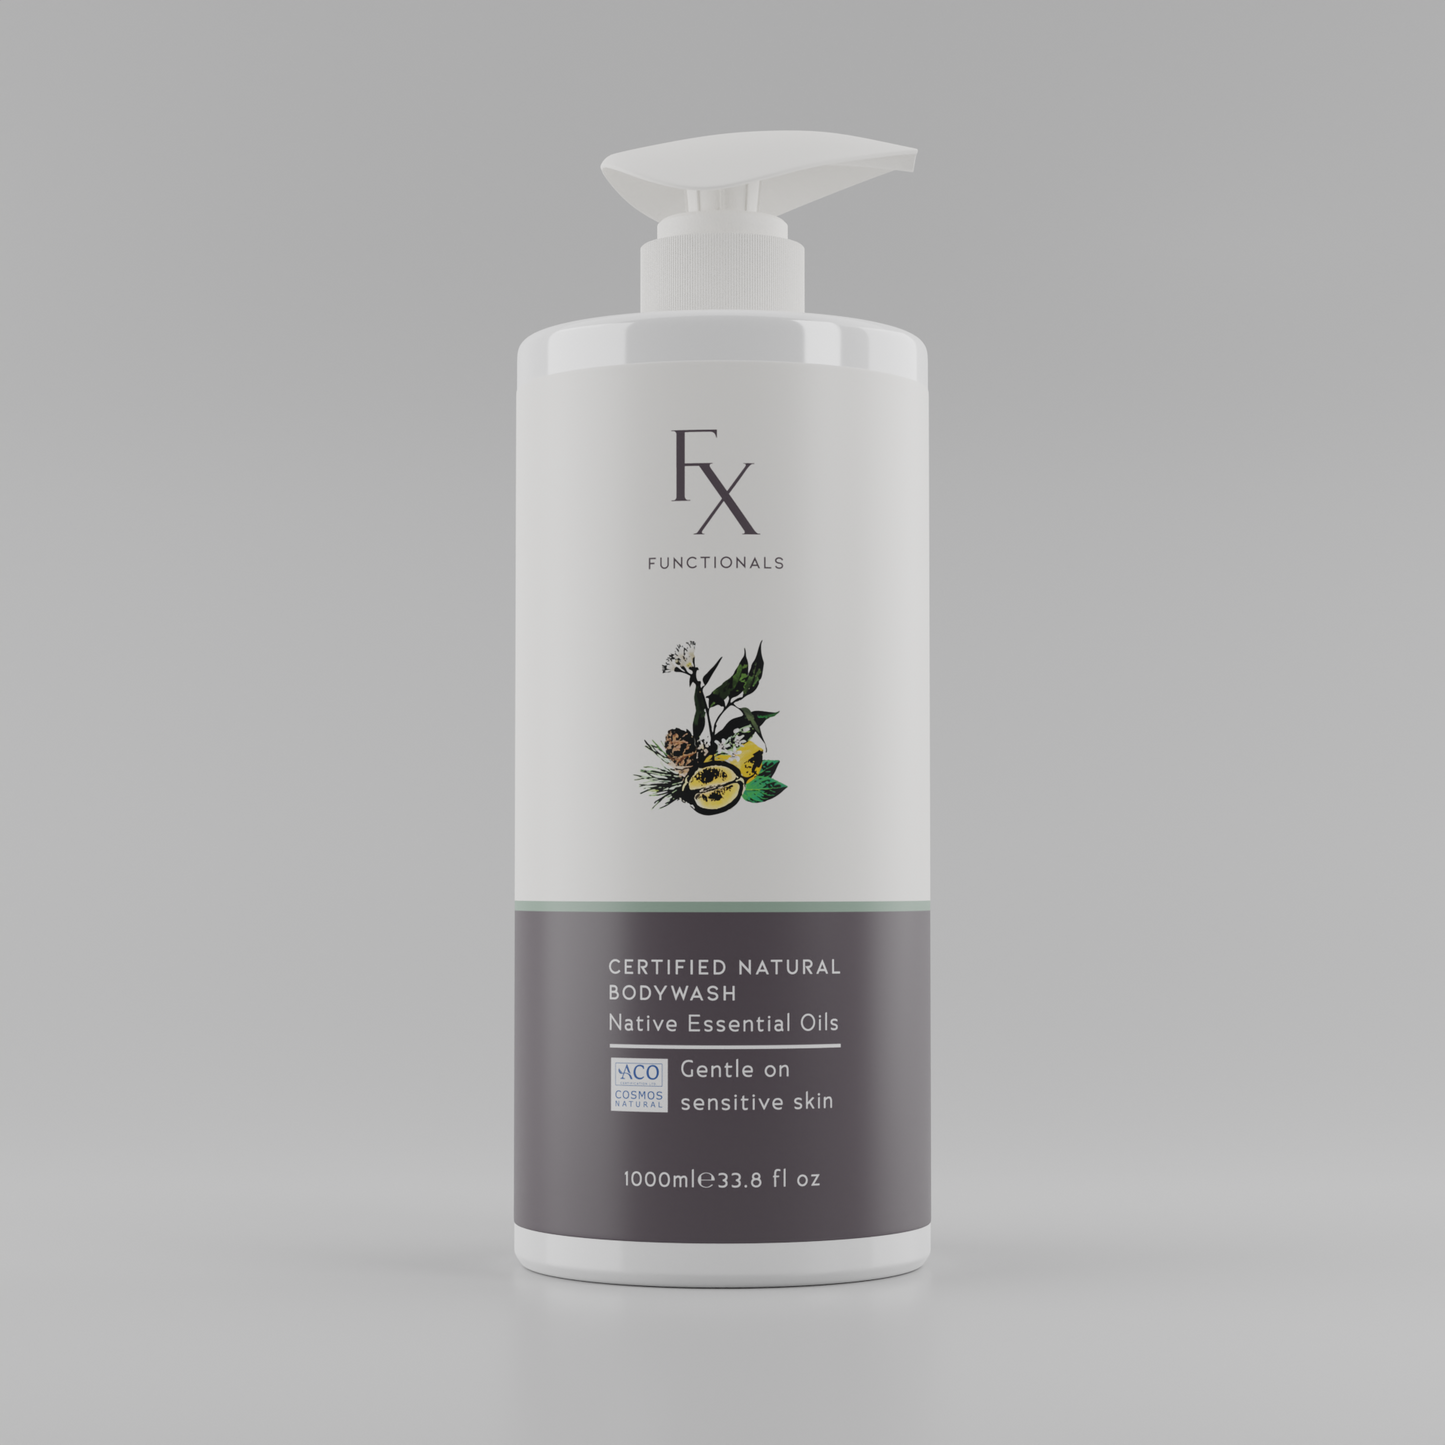 Certified Natural Bodywash with Australian native essential oils on grey background